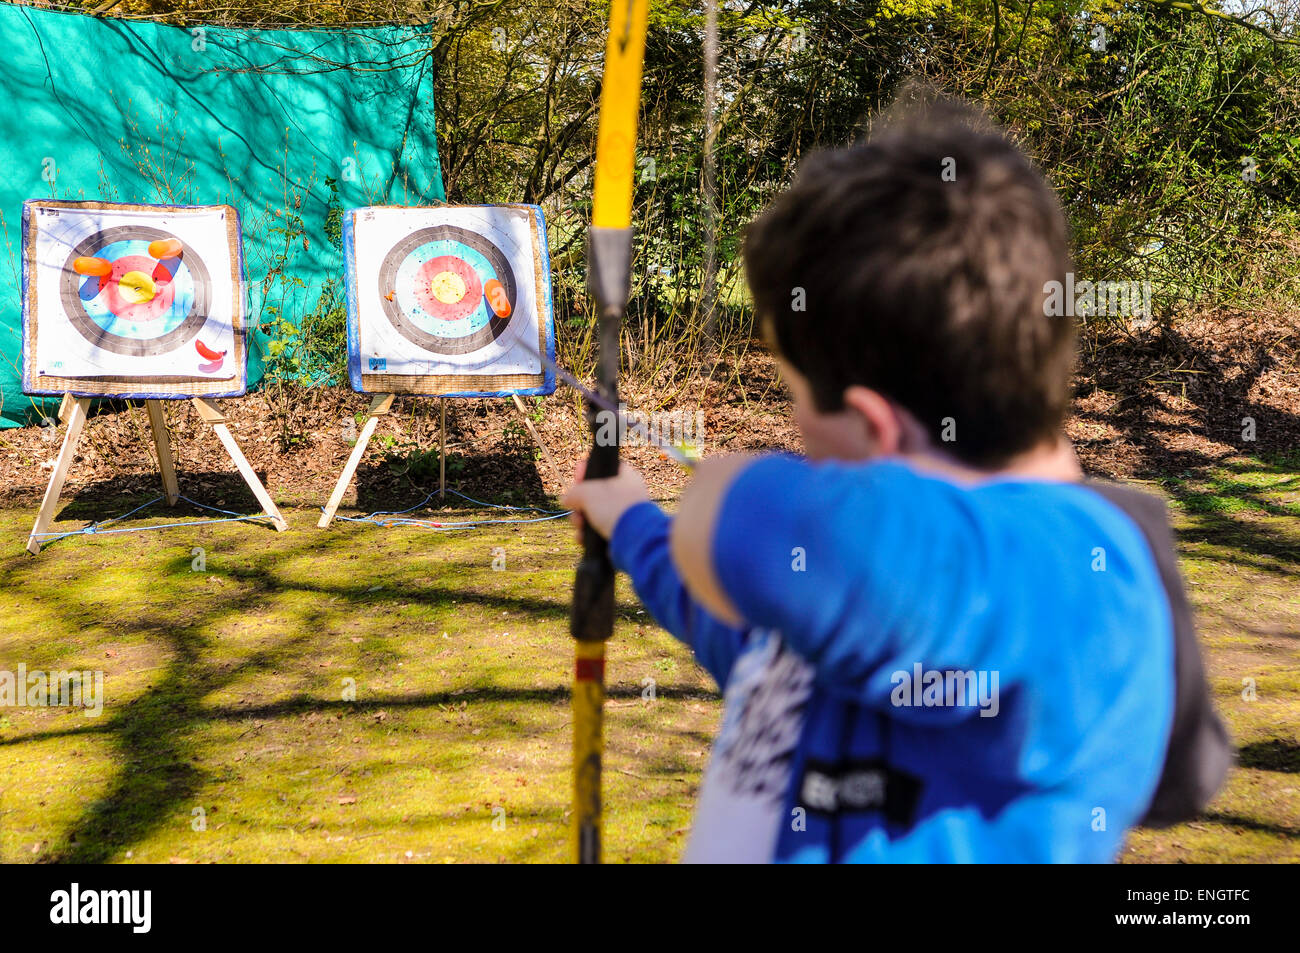 A young boy uses a bow and arrow during an archery session Stock Photo